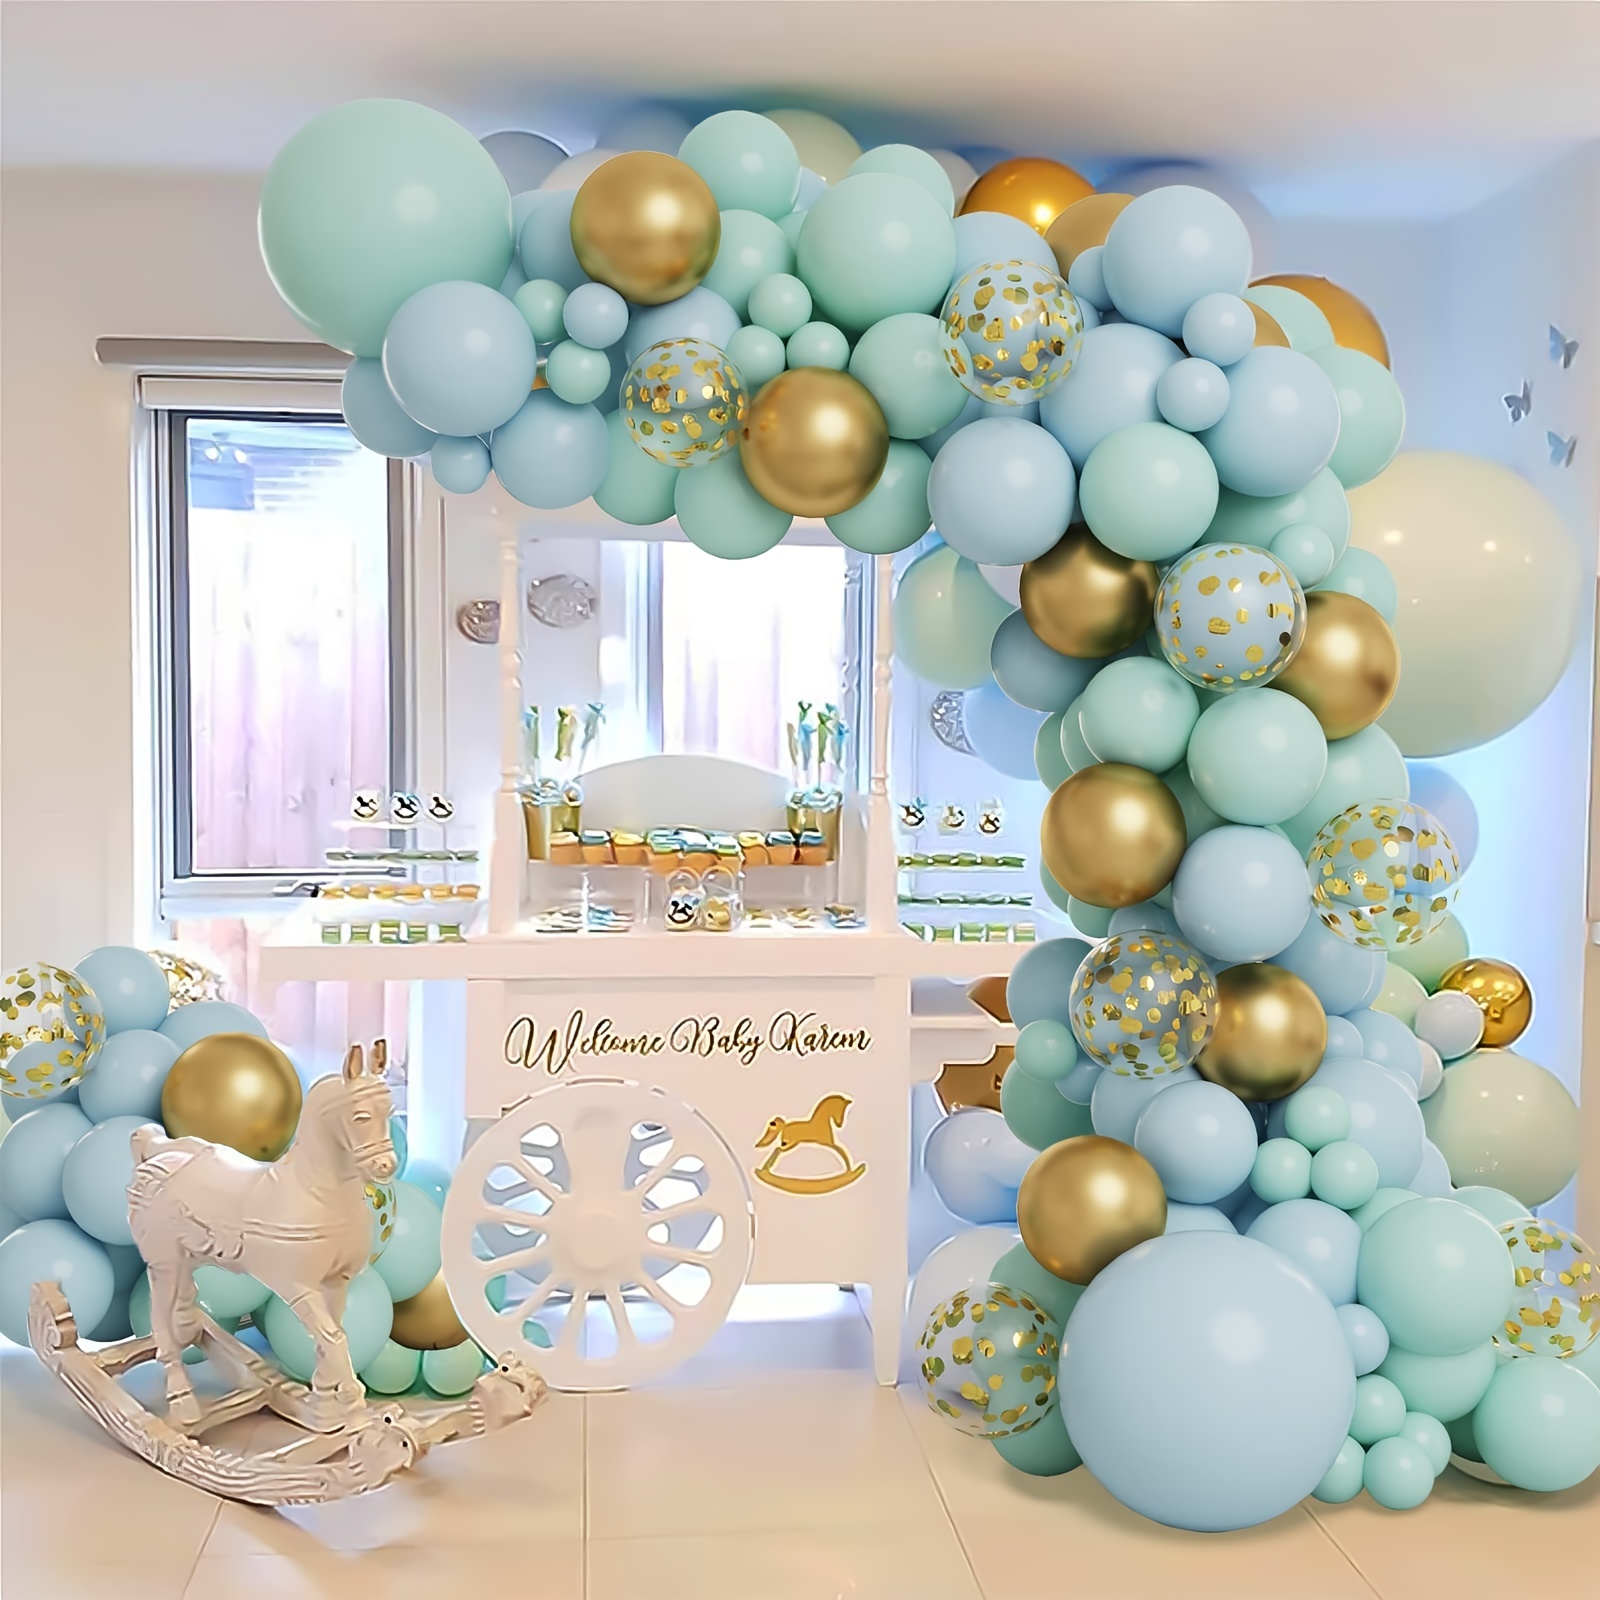 Set, Mint Green Blue Golden/brown Golden Balloon Wreath Set, Totaling  124/157 Latex Balloons, Suitable For Weddings, Baby Showers, Birthday Party  Deco